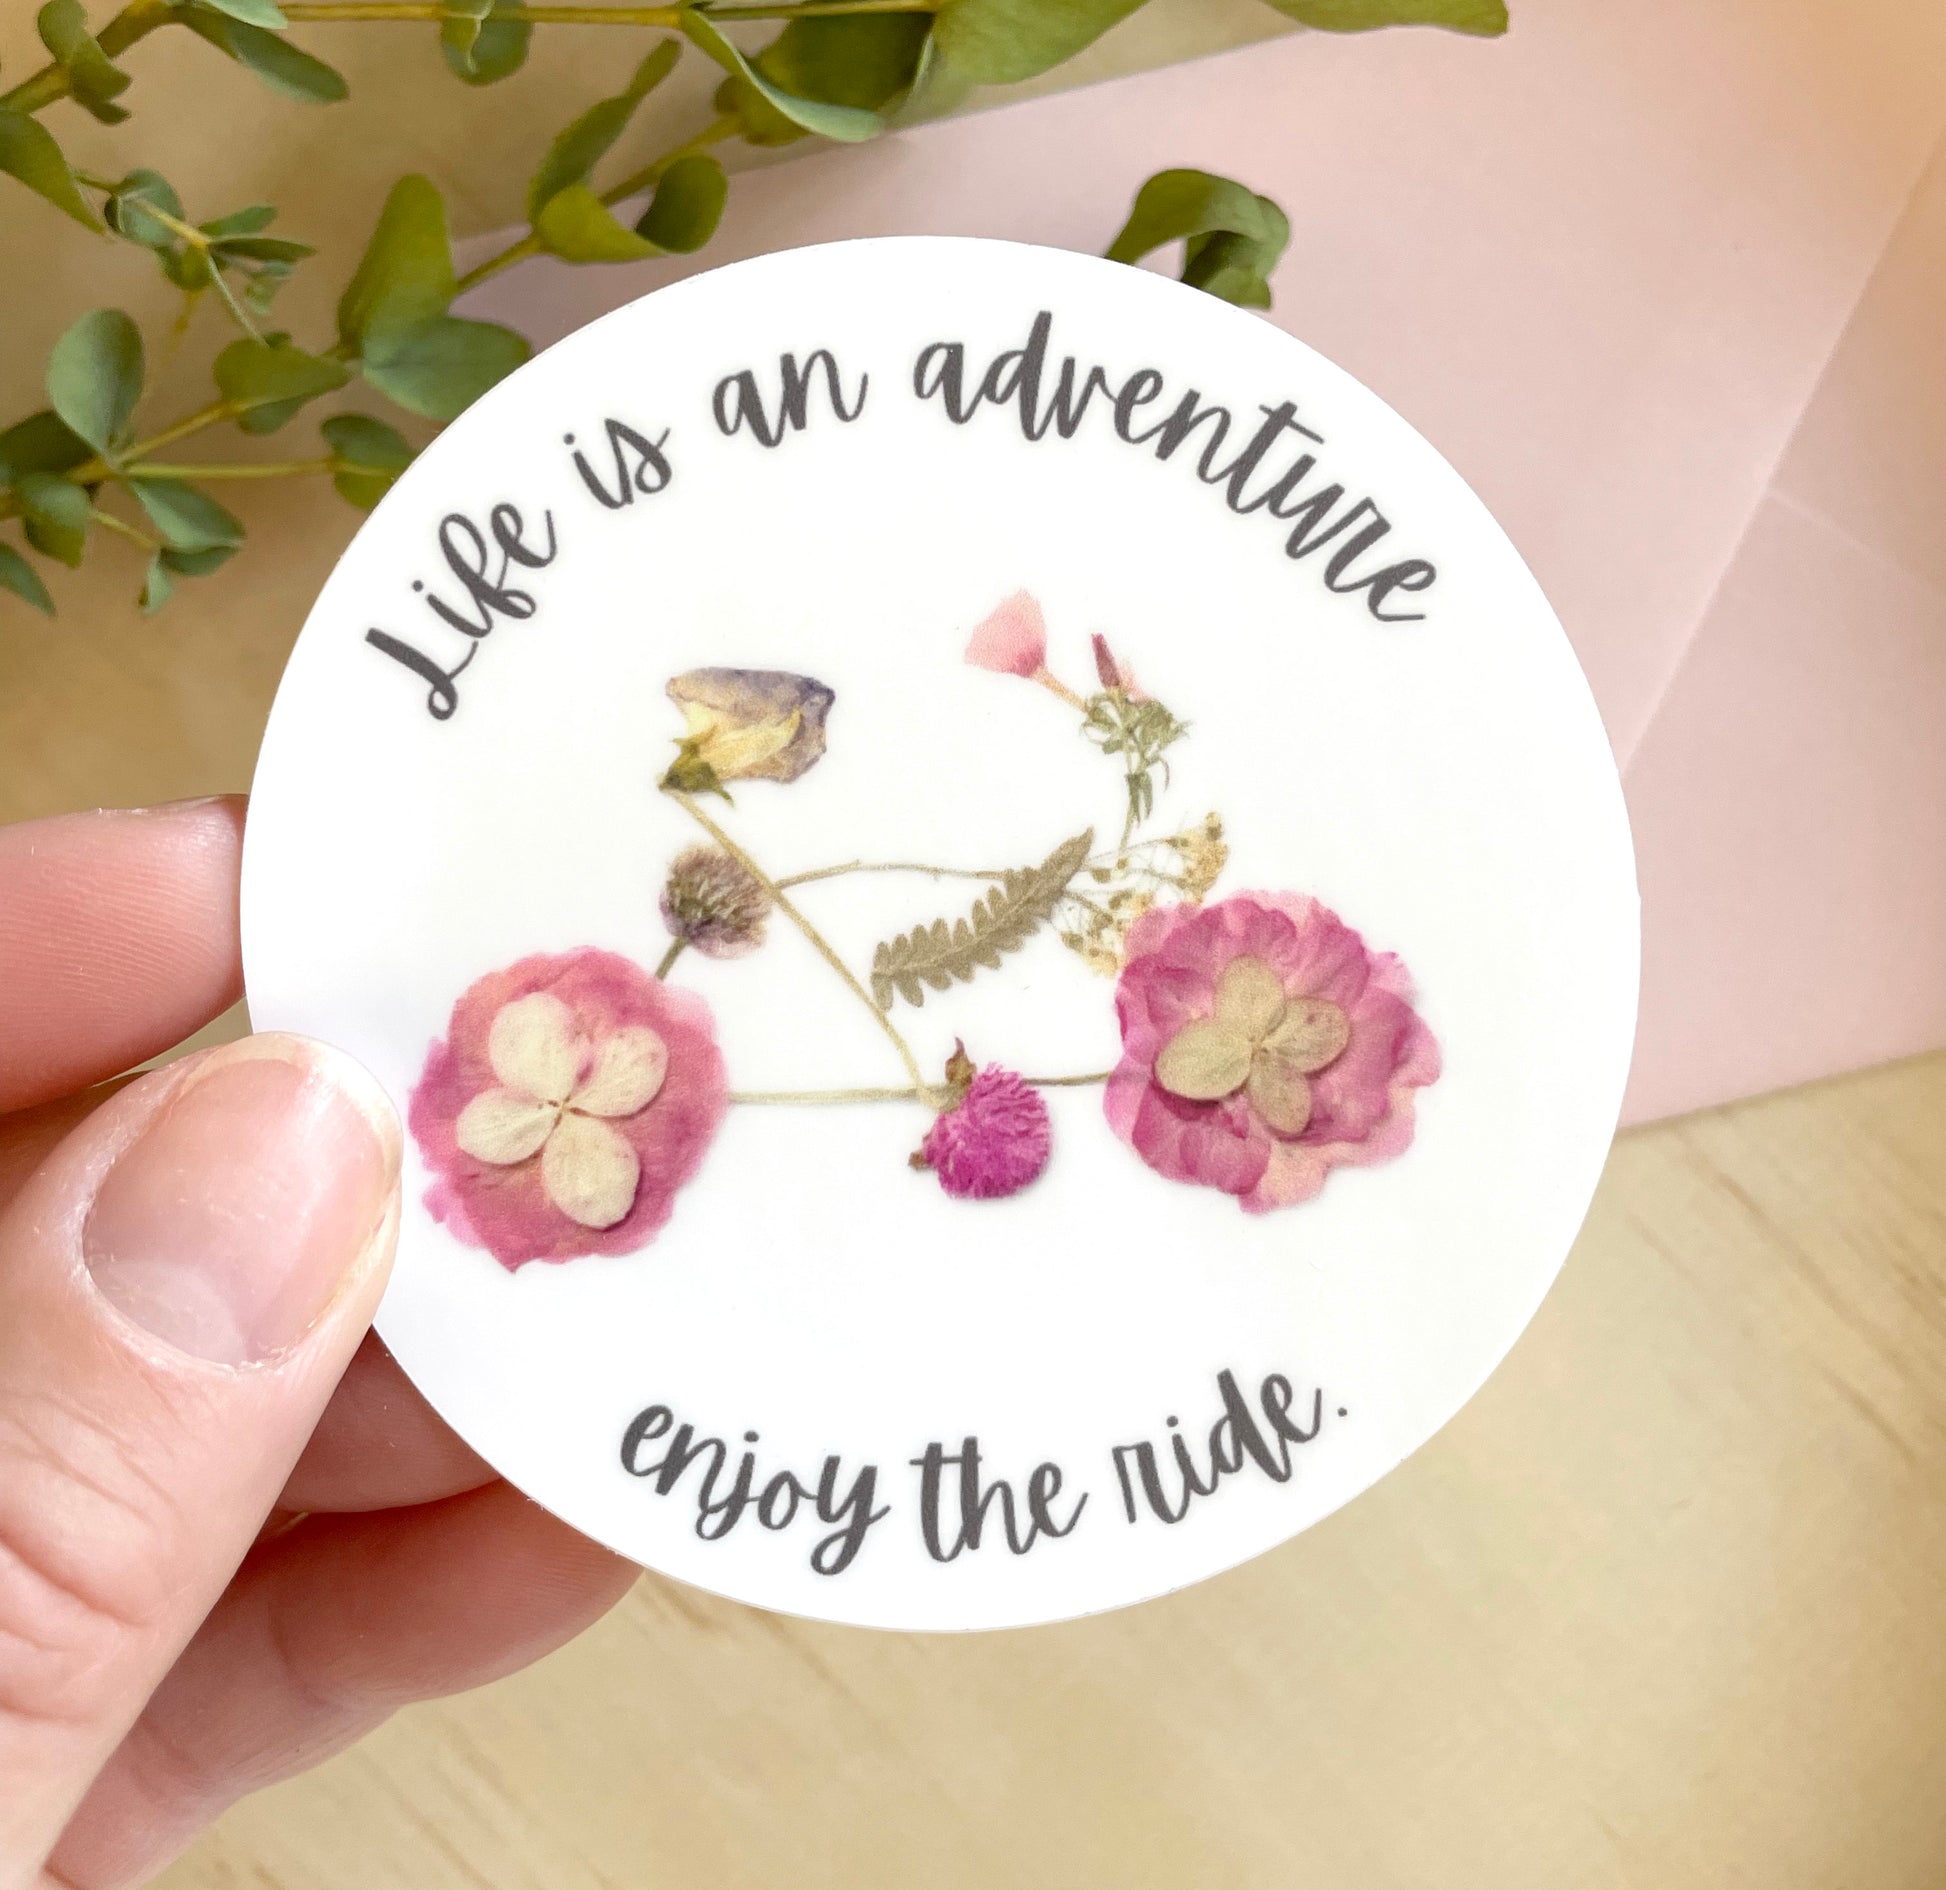 sticker of pink floral bike made from dried flowers, quote life is an adventure enjoy the ride. 